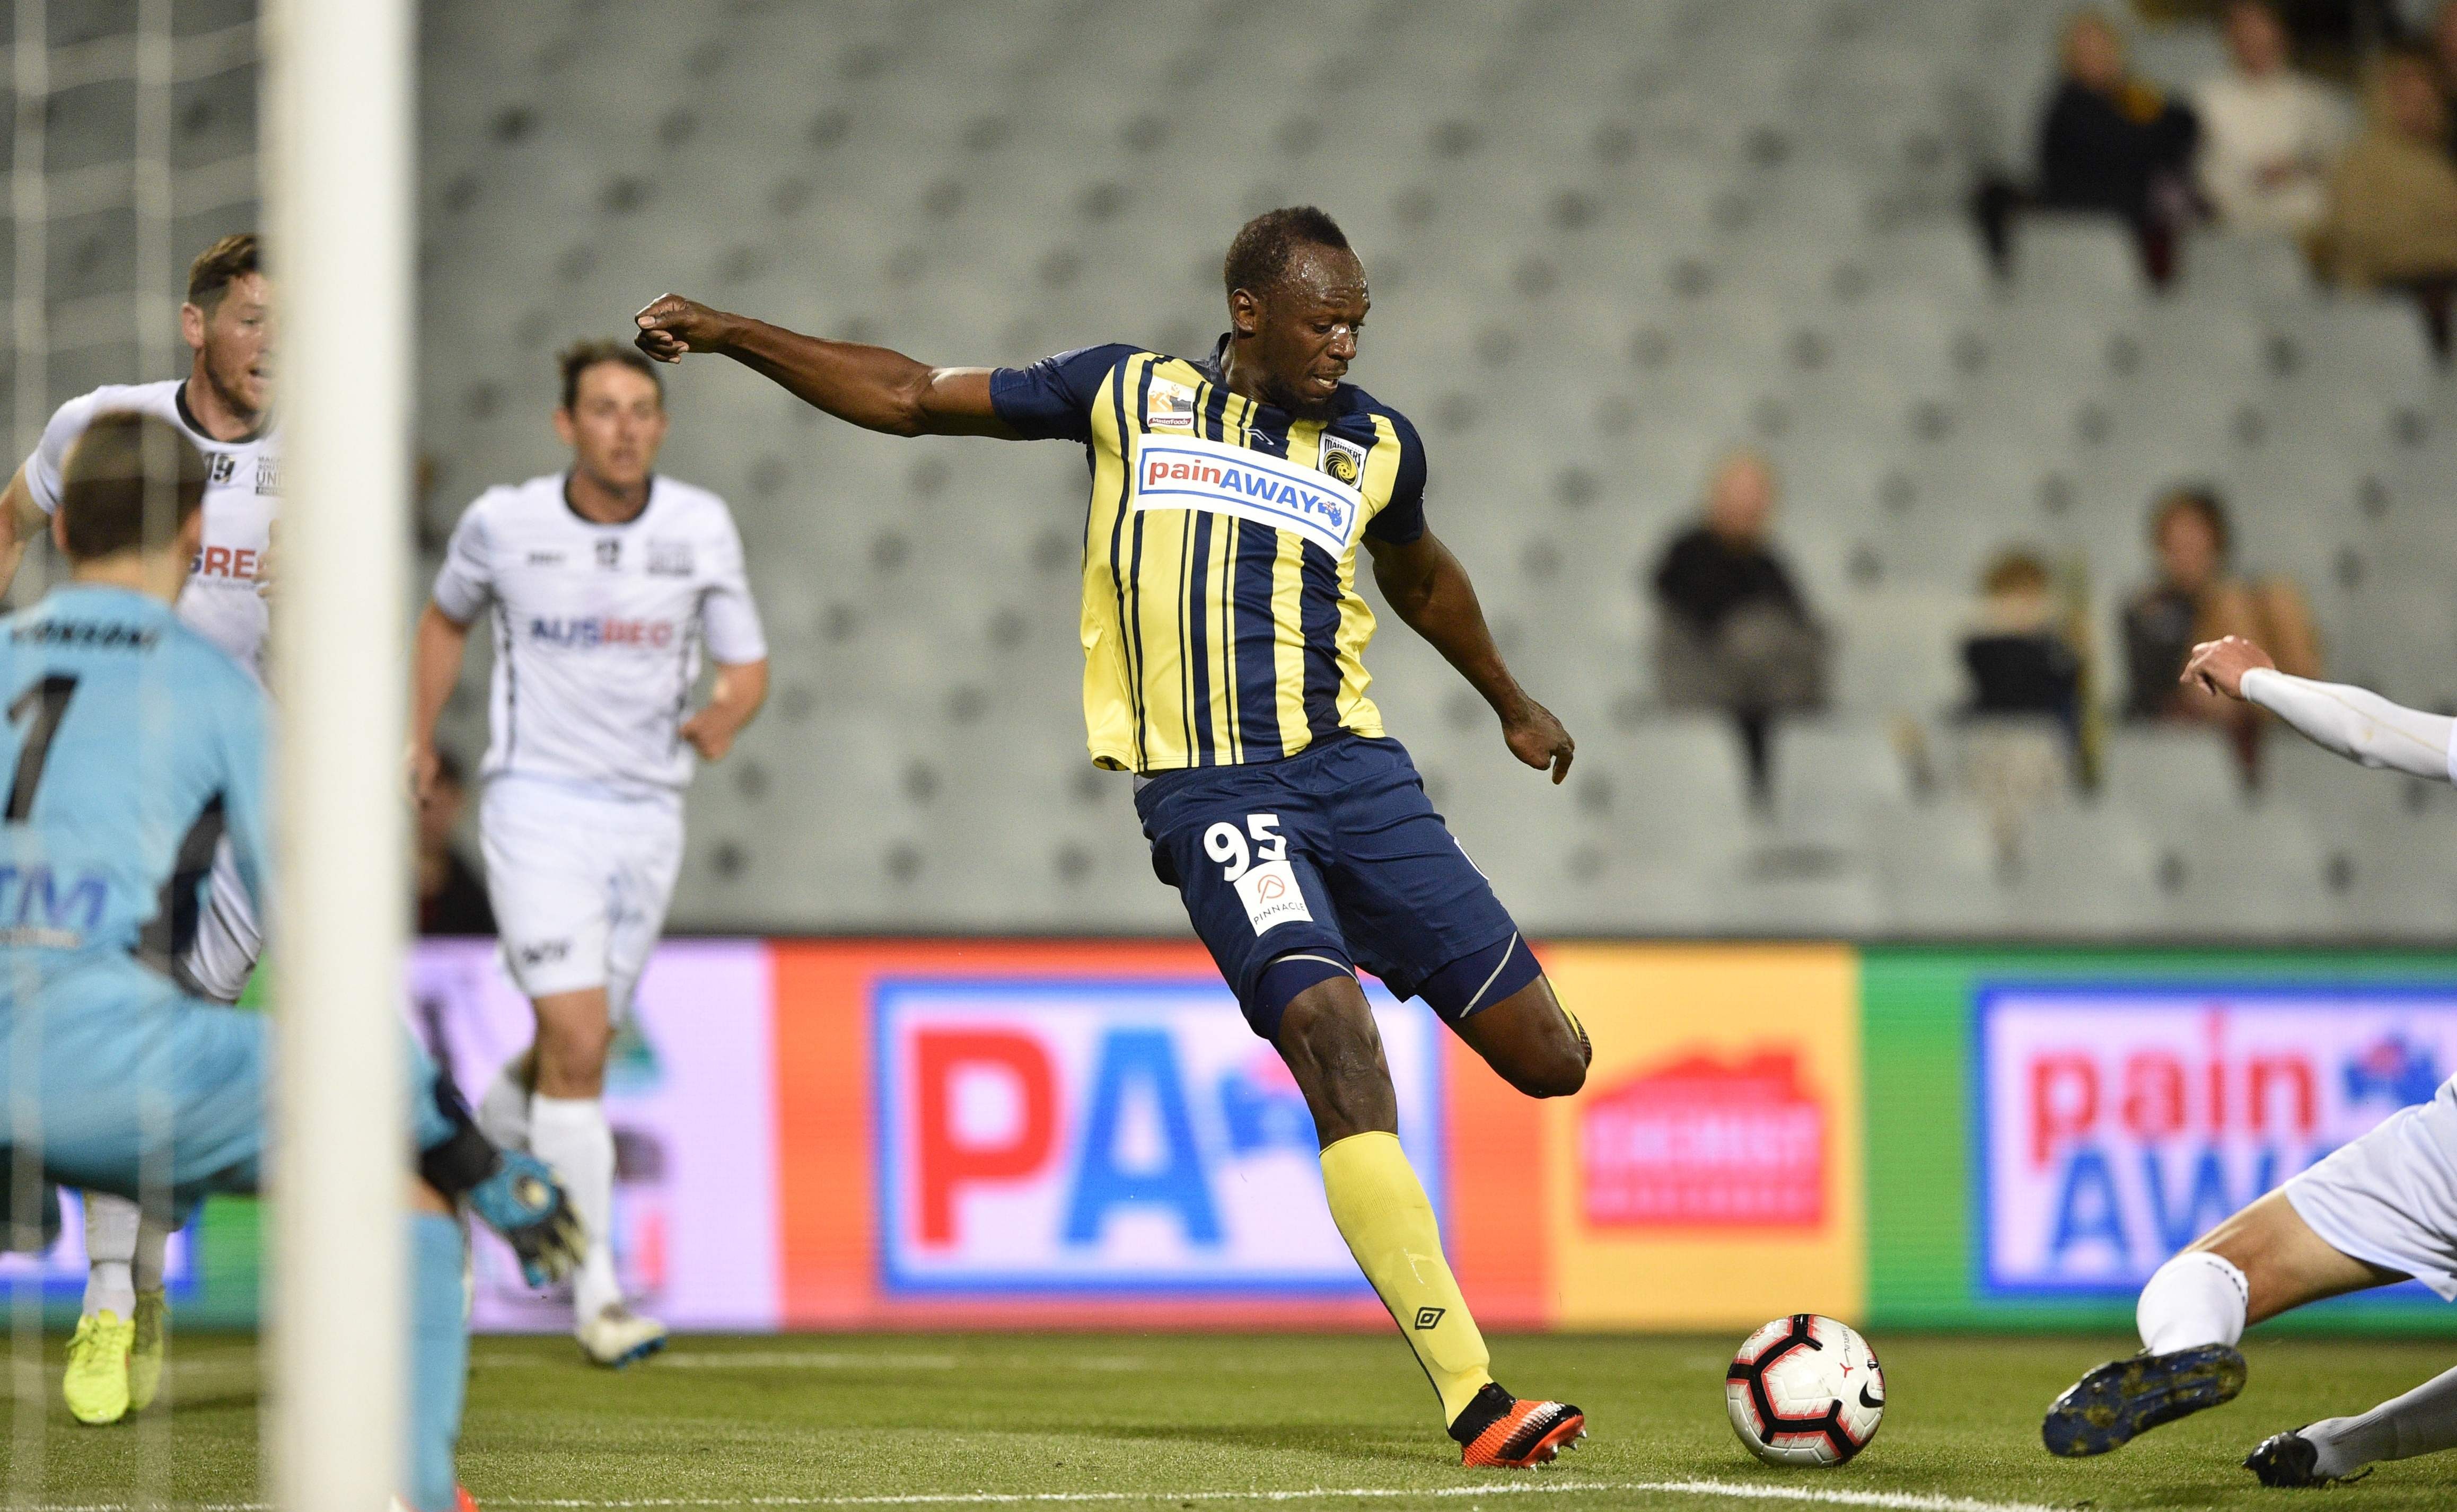 Olympic sprinter Usain Bolt (centre) played for A-League side Central Coast Mariners as part of a trial and grabbed two goals. Photo: AFP